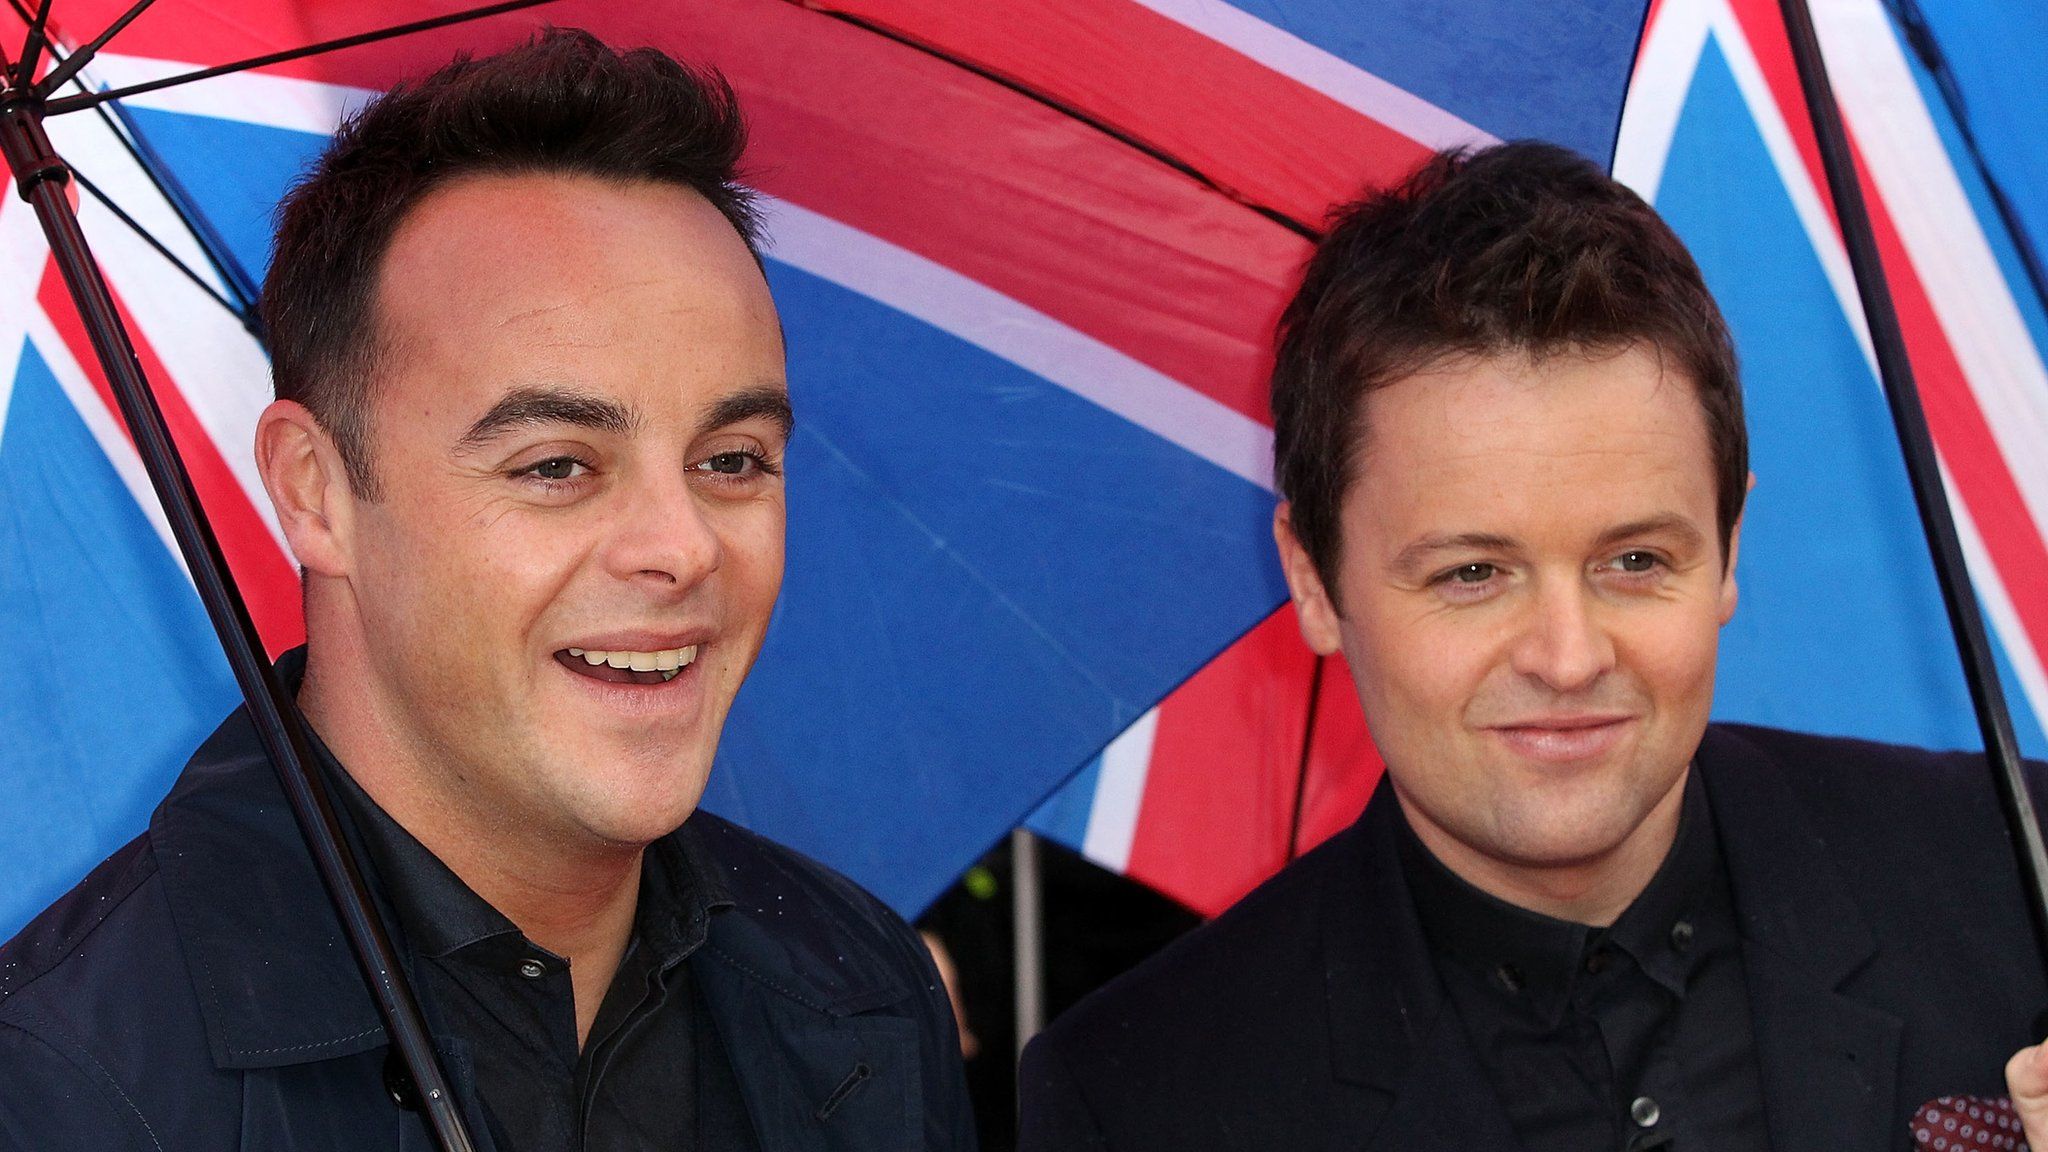 Ant McPartlin (left) and Declan Donnelly